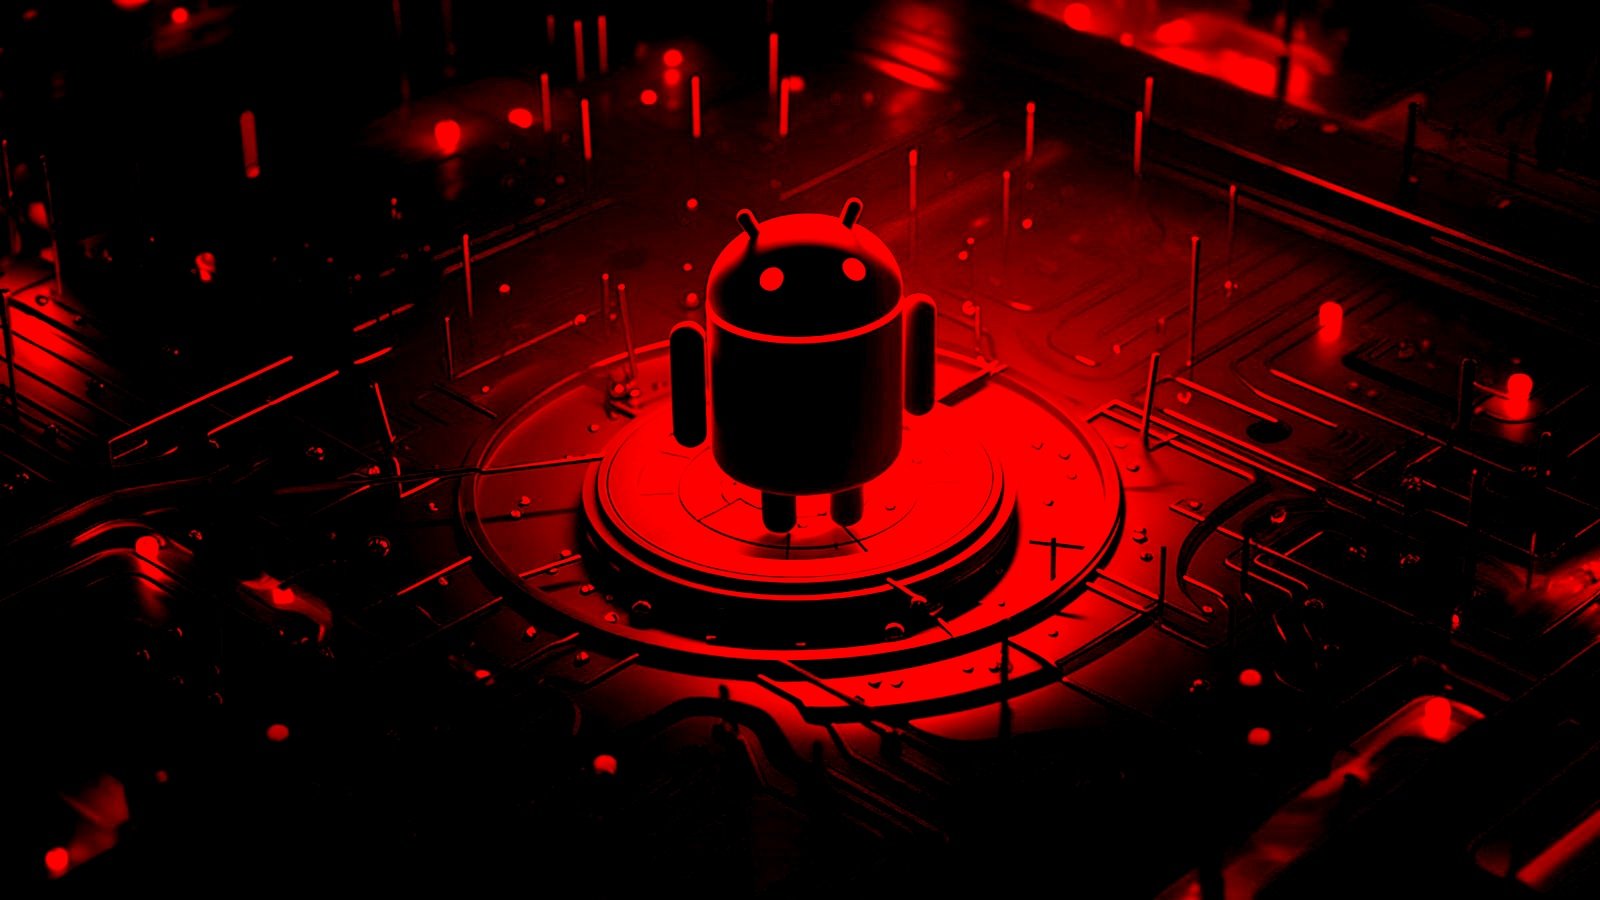 September Android updates fix zero-day exploited in attacks – Source: www.bleepingcomputer.com